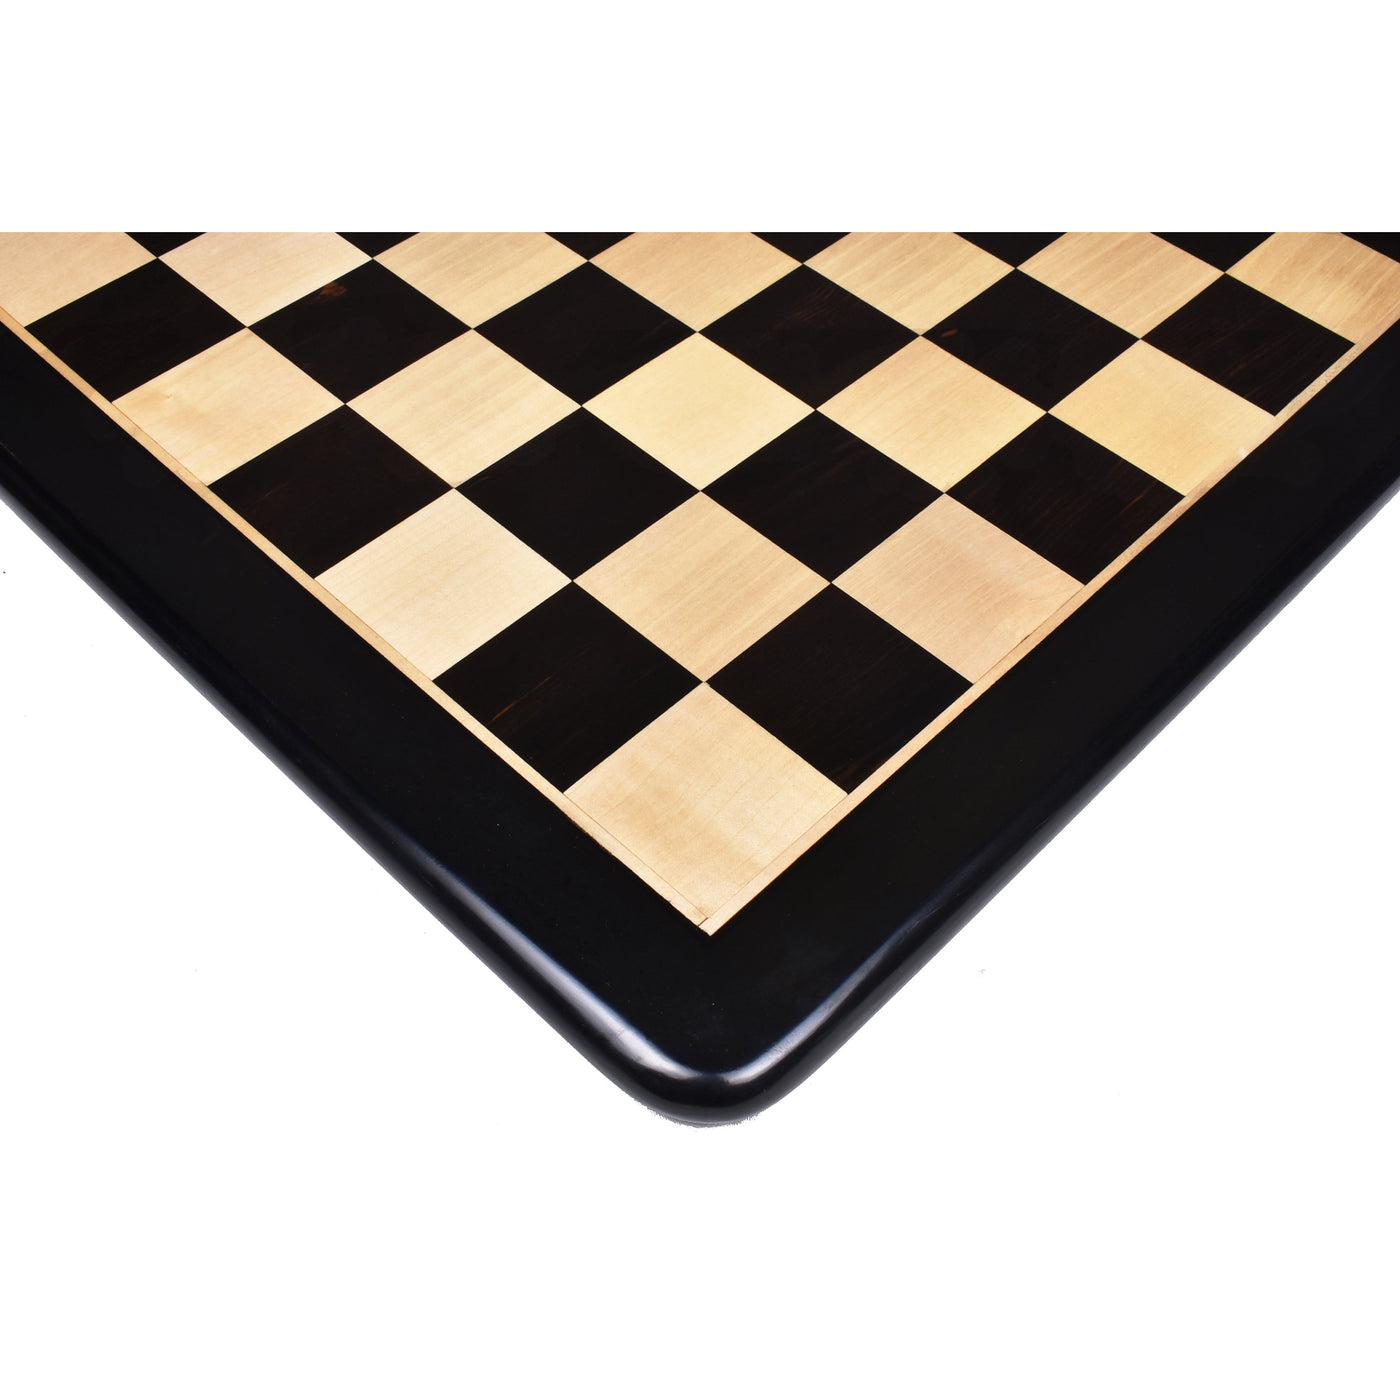 Large Solid Inlaid Wood |  Chess Set Handmade | Wood Chess Sets